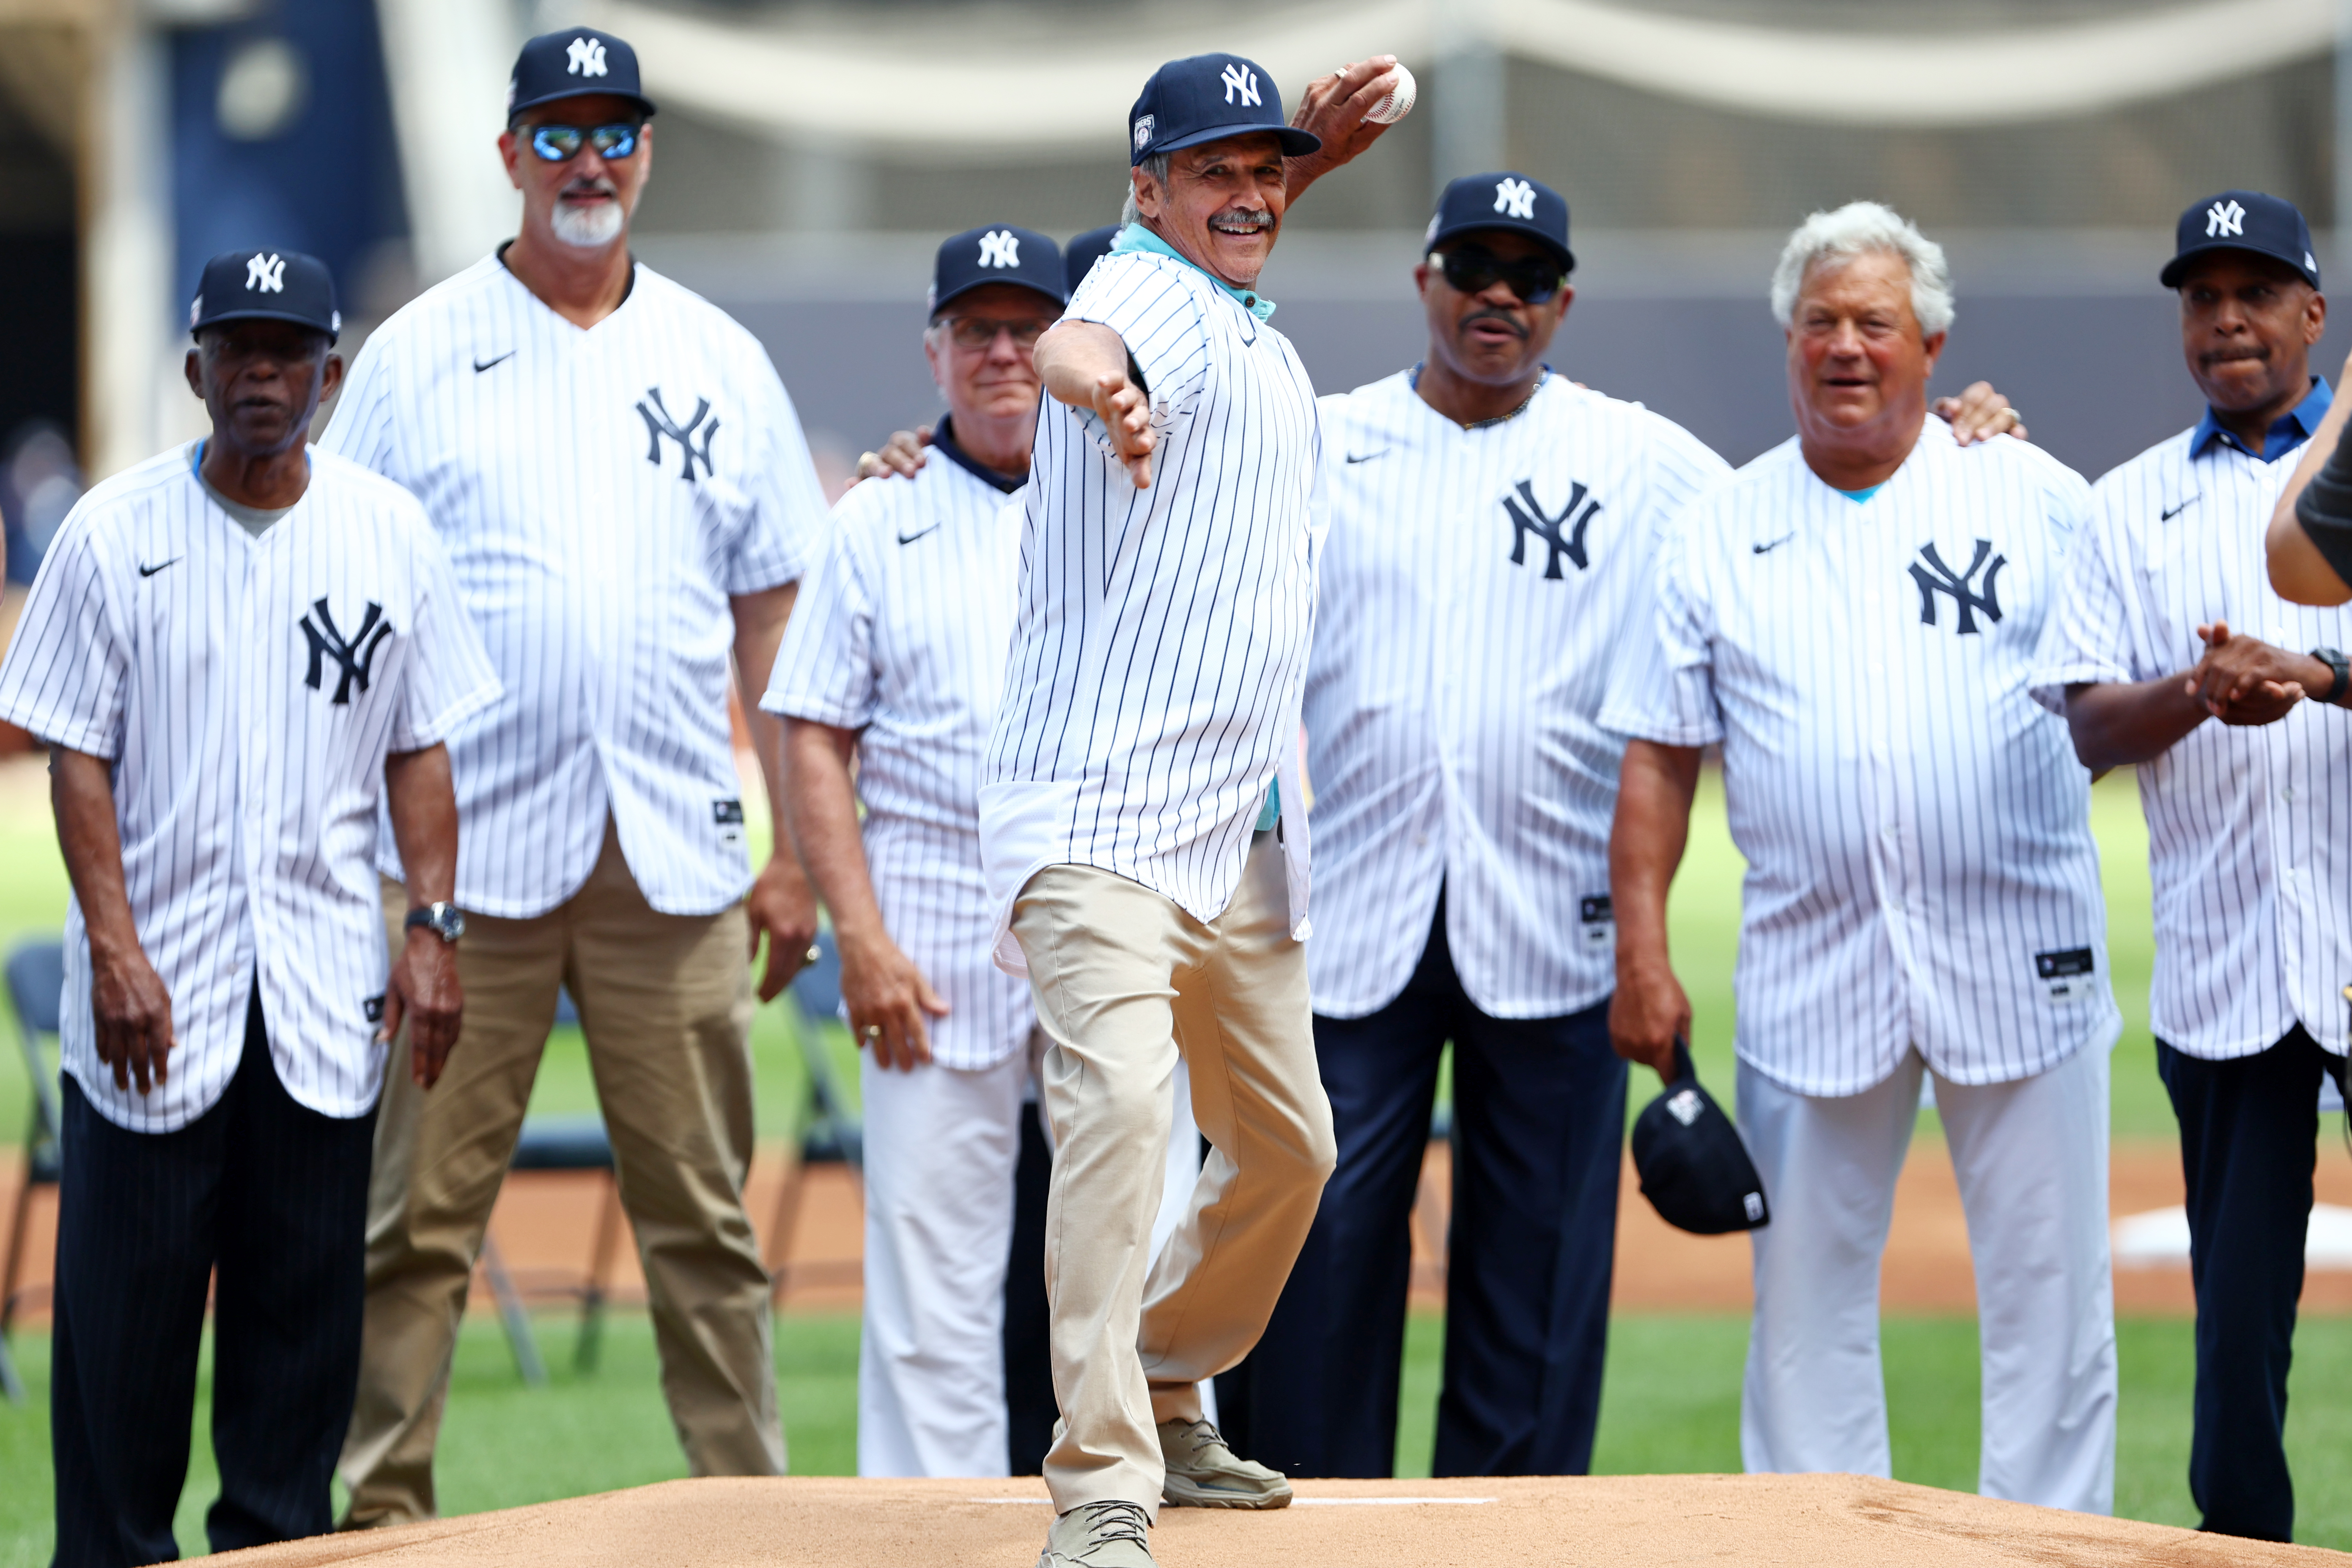 Yankees resume annual Old-Timers' Day after pandemic pause - CBS New York